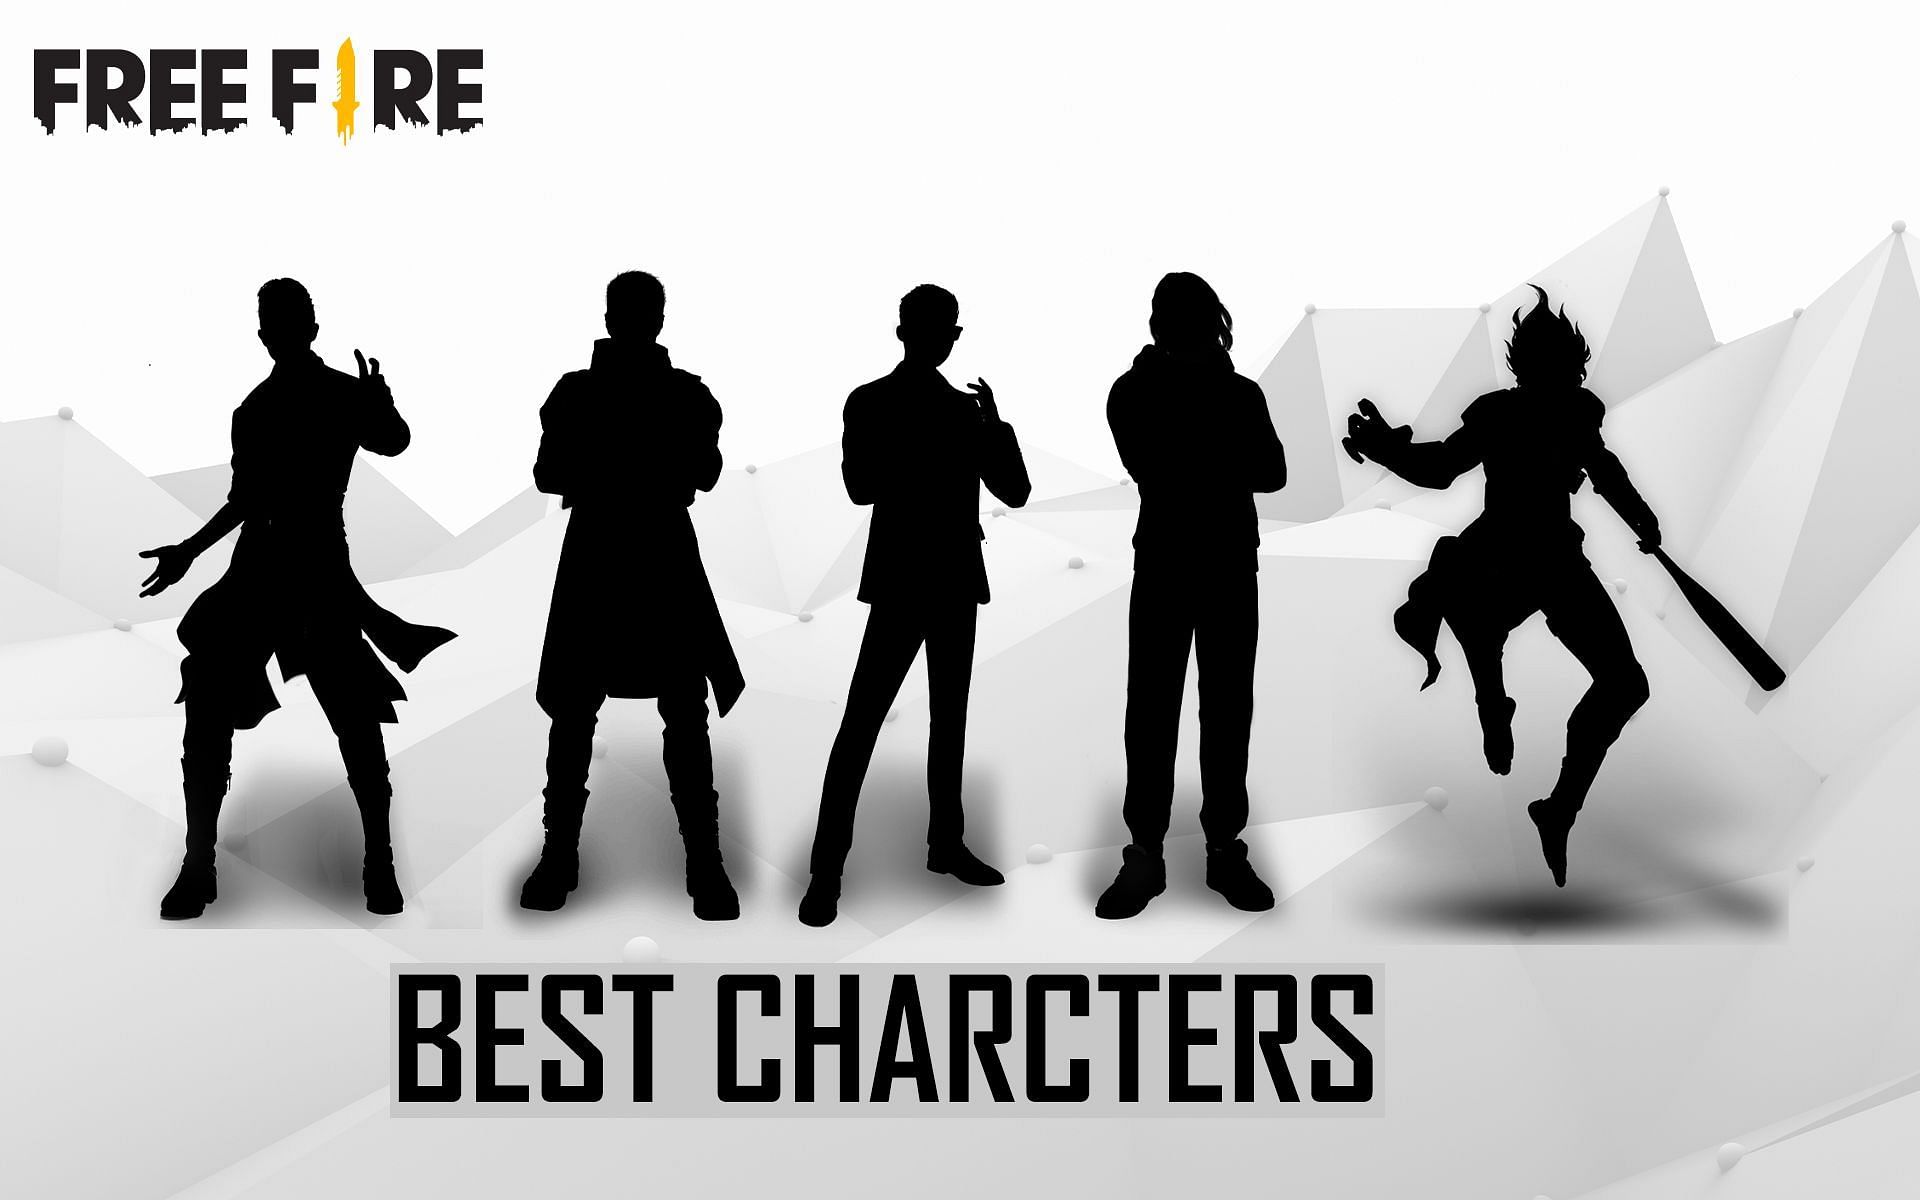 Many gamers wish to find the best characters for Free Fire (Image via Sportskeeda)